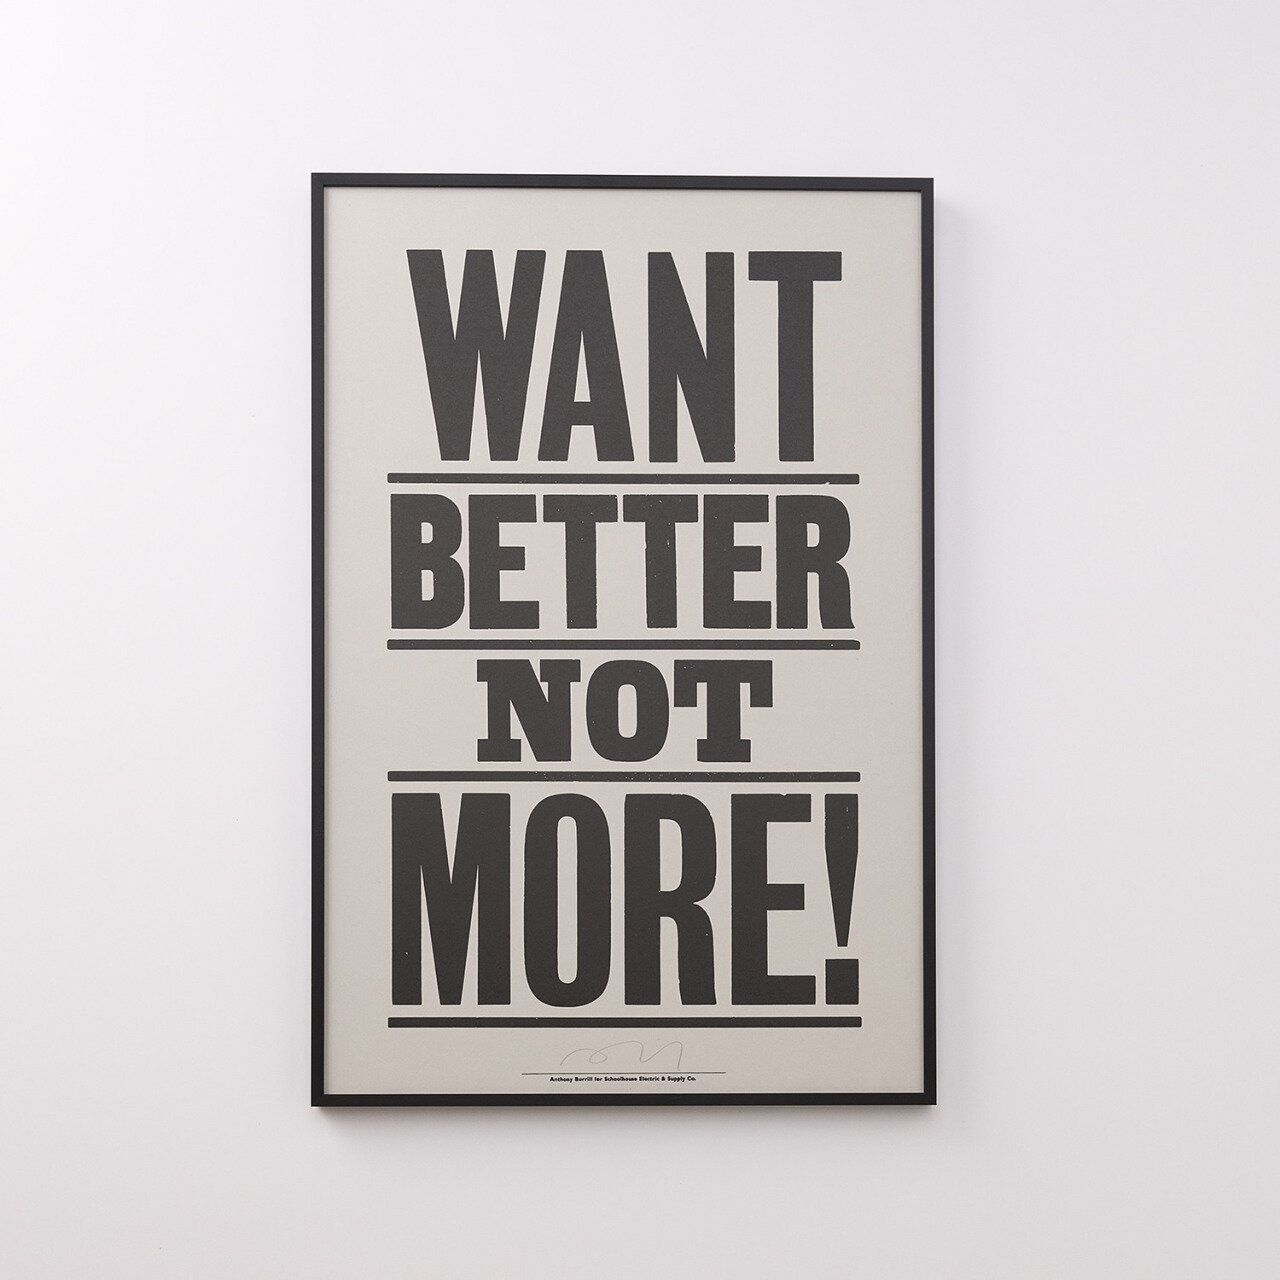 Want better, not more.